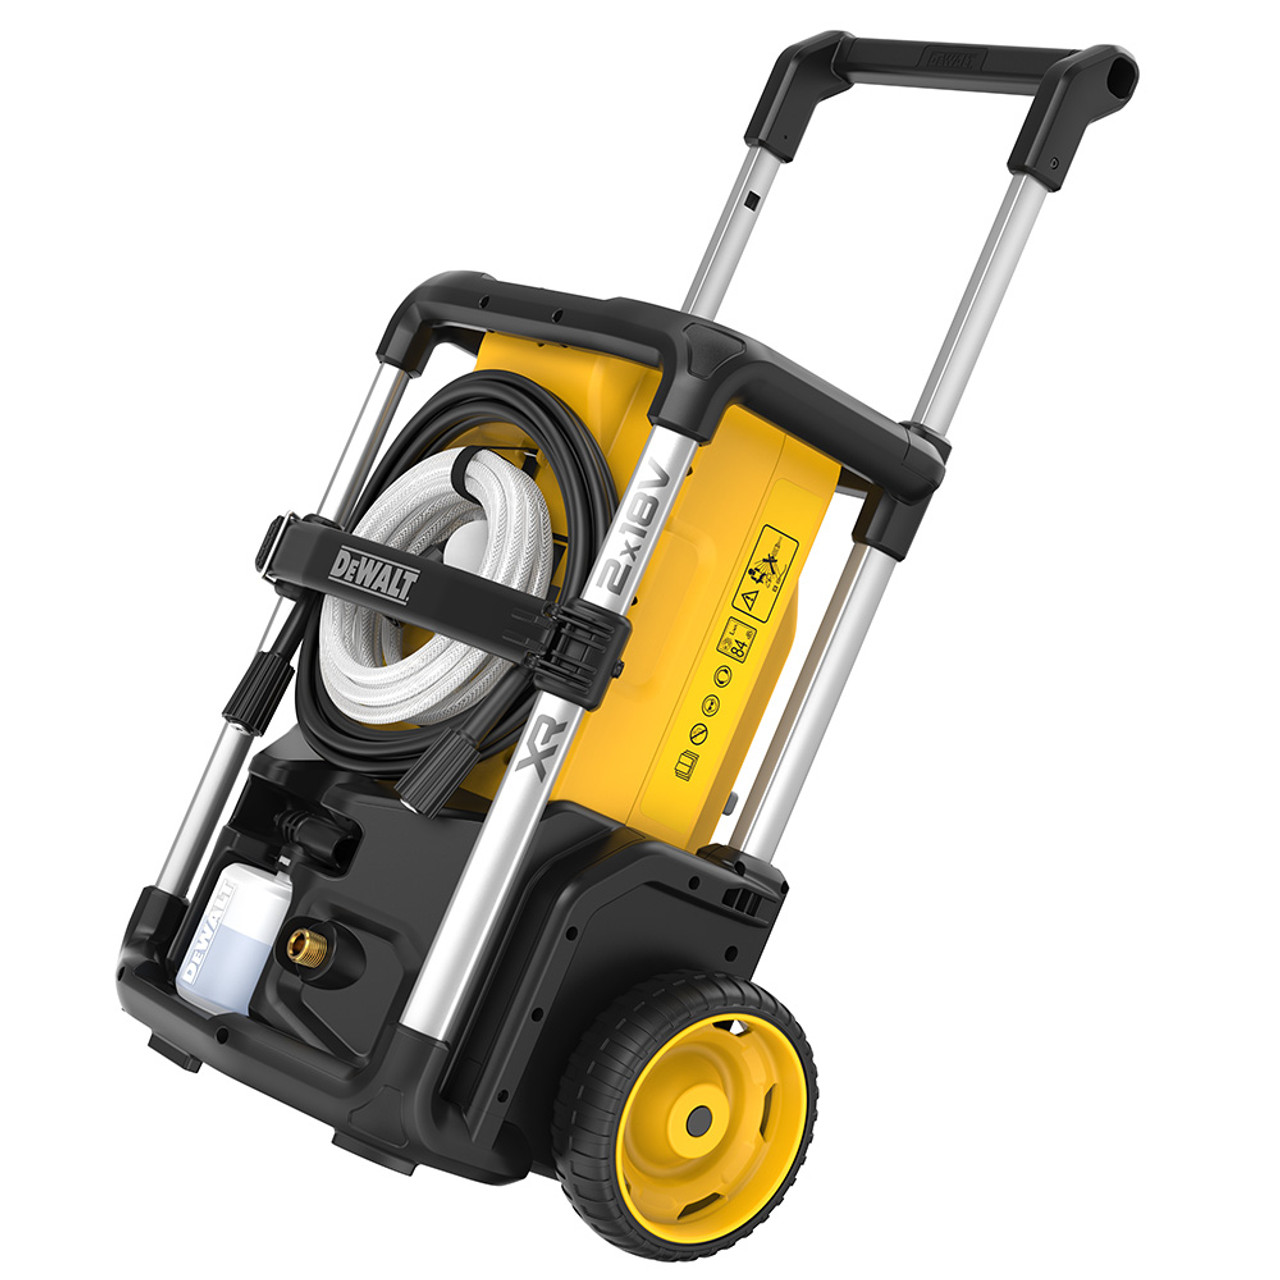 Dewalt pressure washer has a heavy-duty role cage protects the washer from work site knocks and bumps